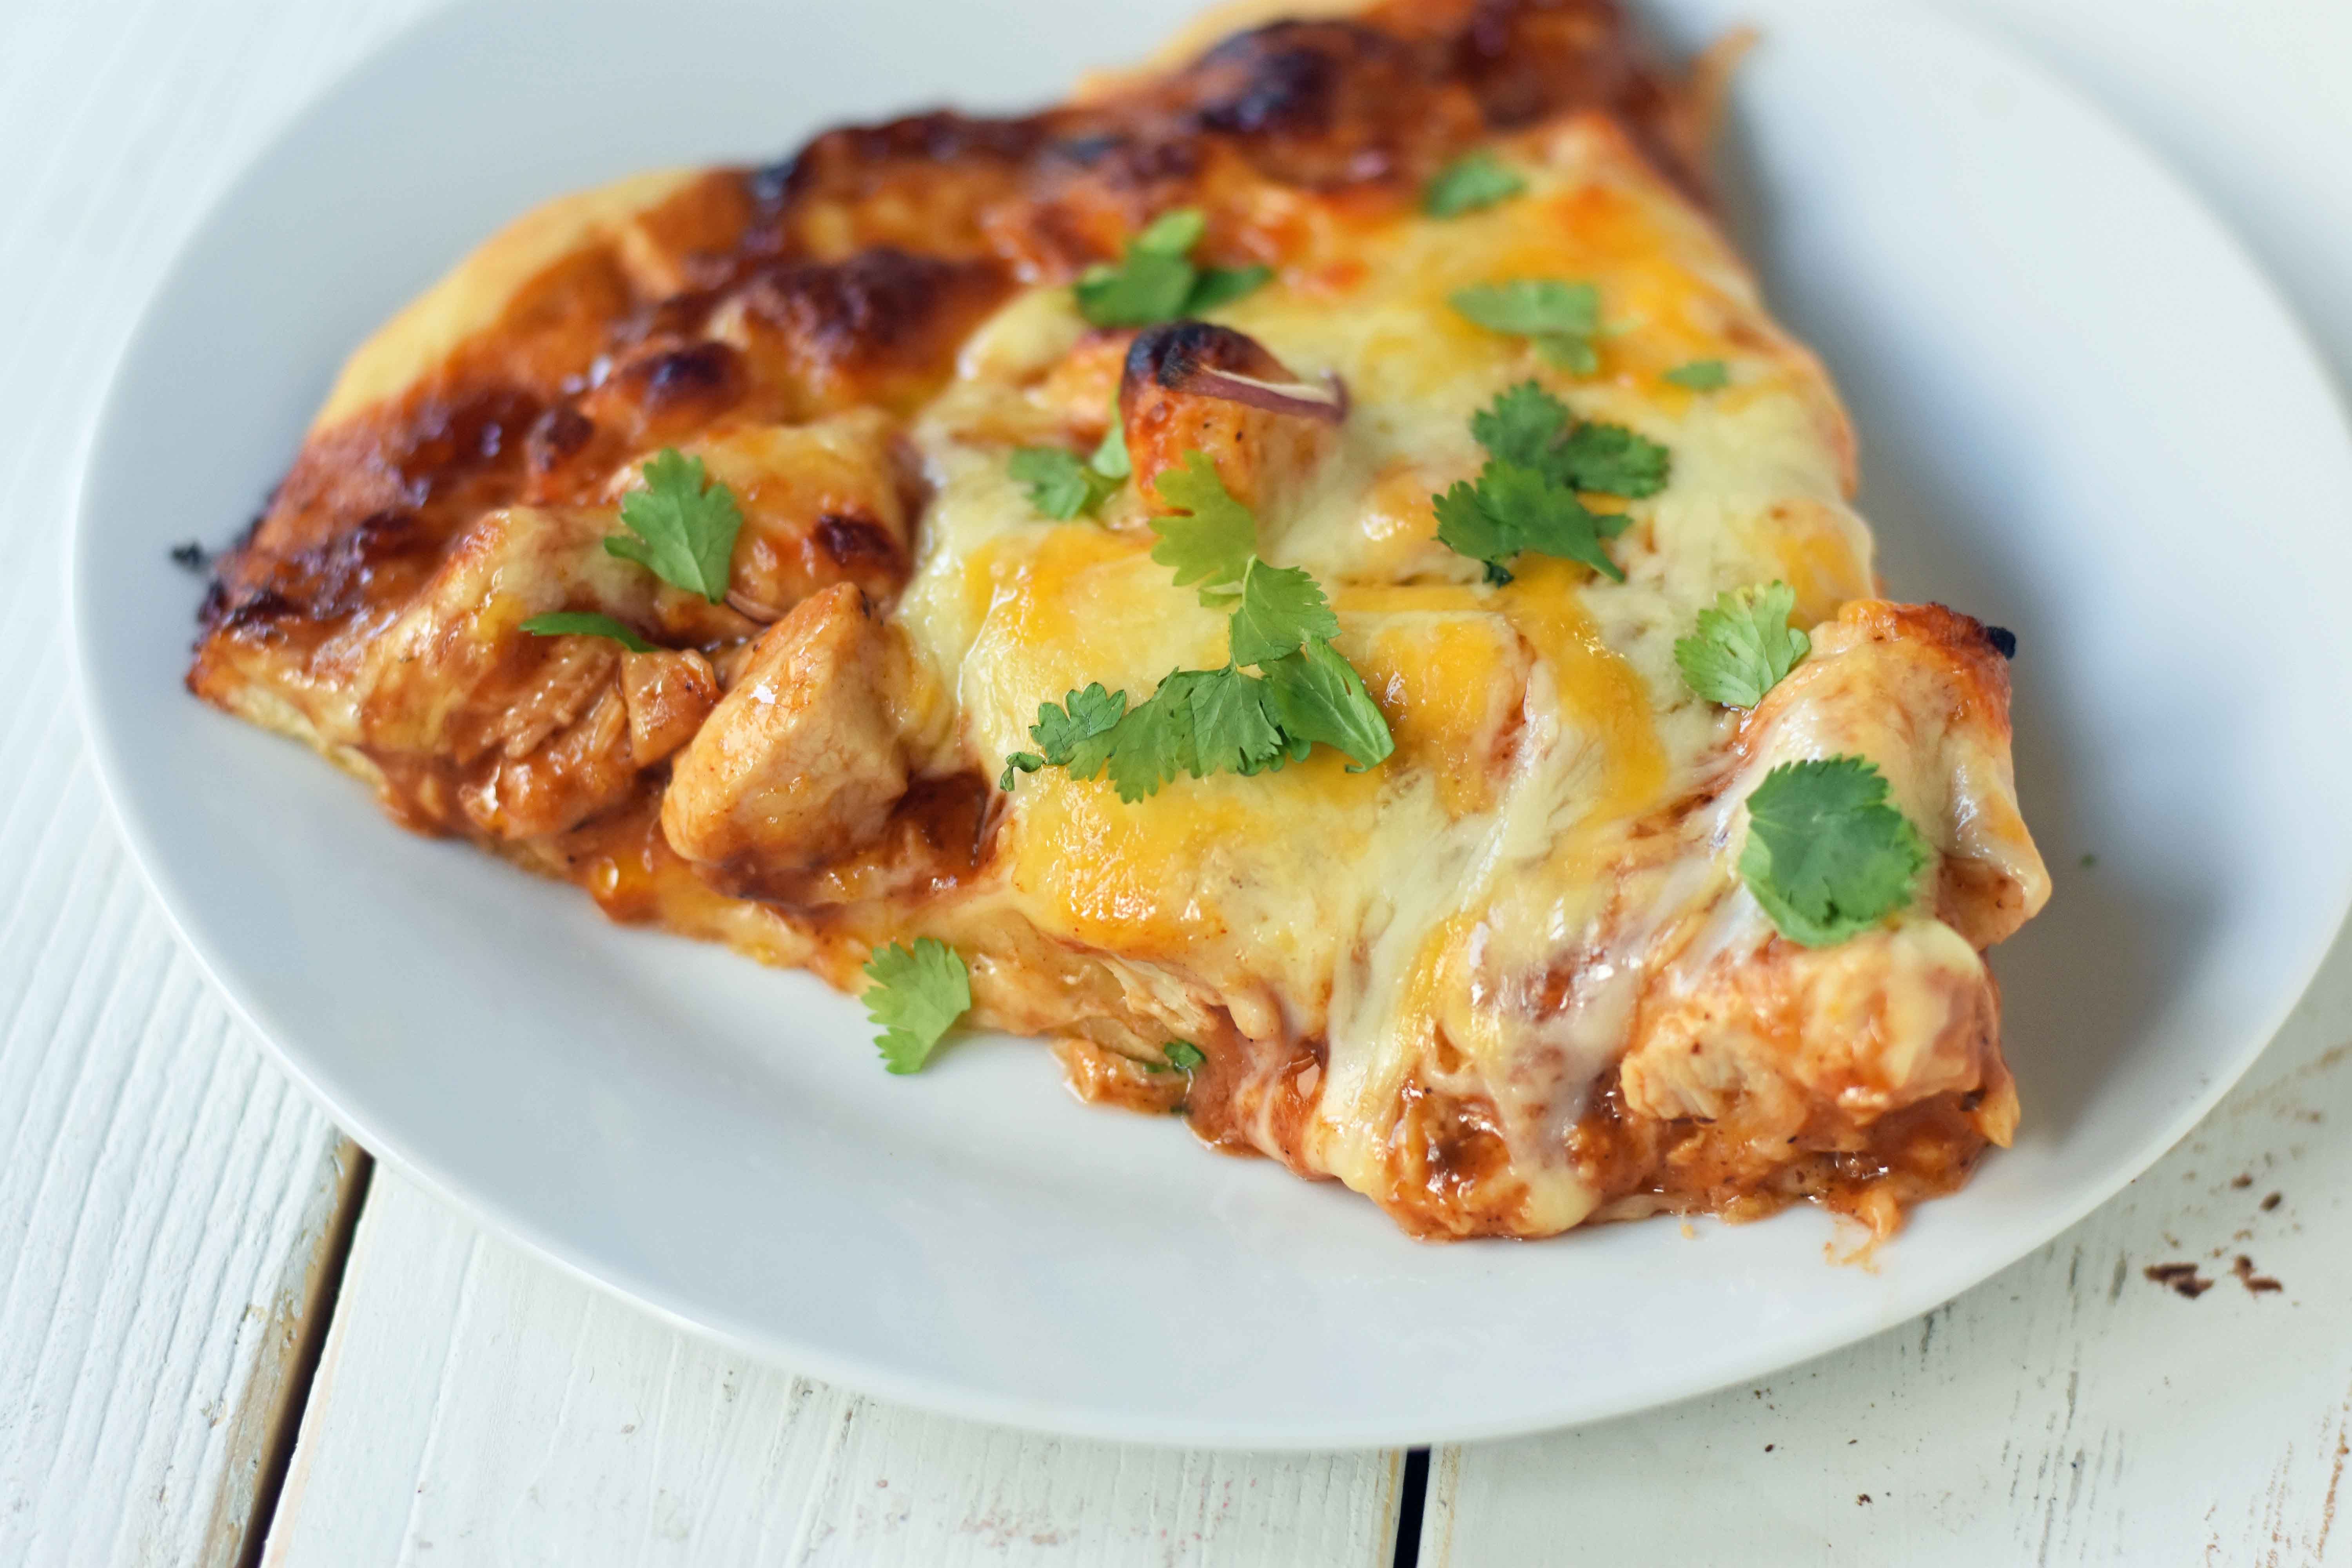 BBQ Chicken Pizza made with an easy homemade pizza crust, BBQ Ranch sauce, cheddar cheese, mozzarella cheese, chicken, red onion, and a touch of fresh cilantro. The BEST BBQ CHICKEN PIZZA. www.modernhoney.com